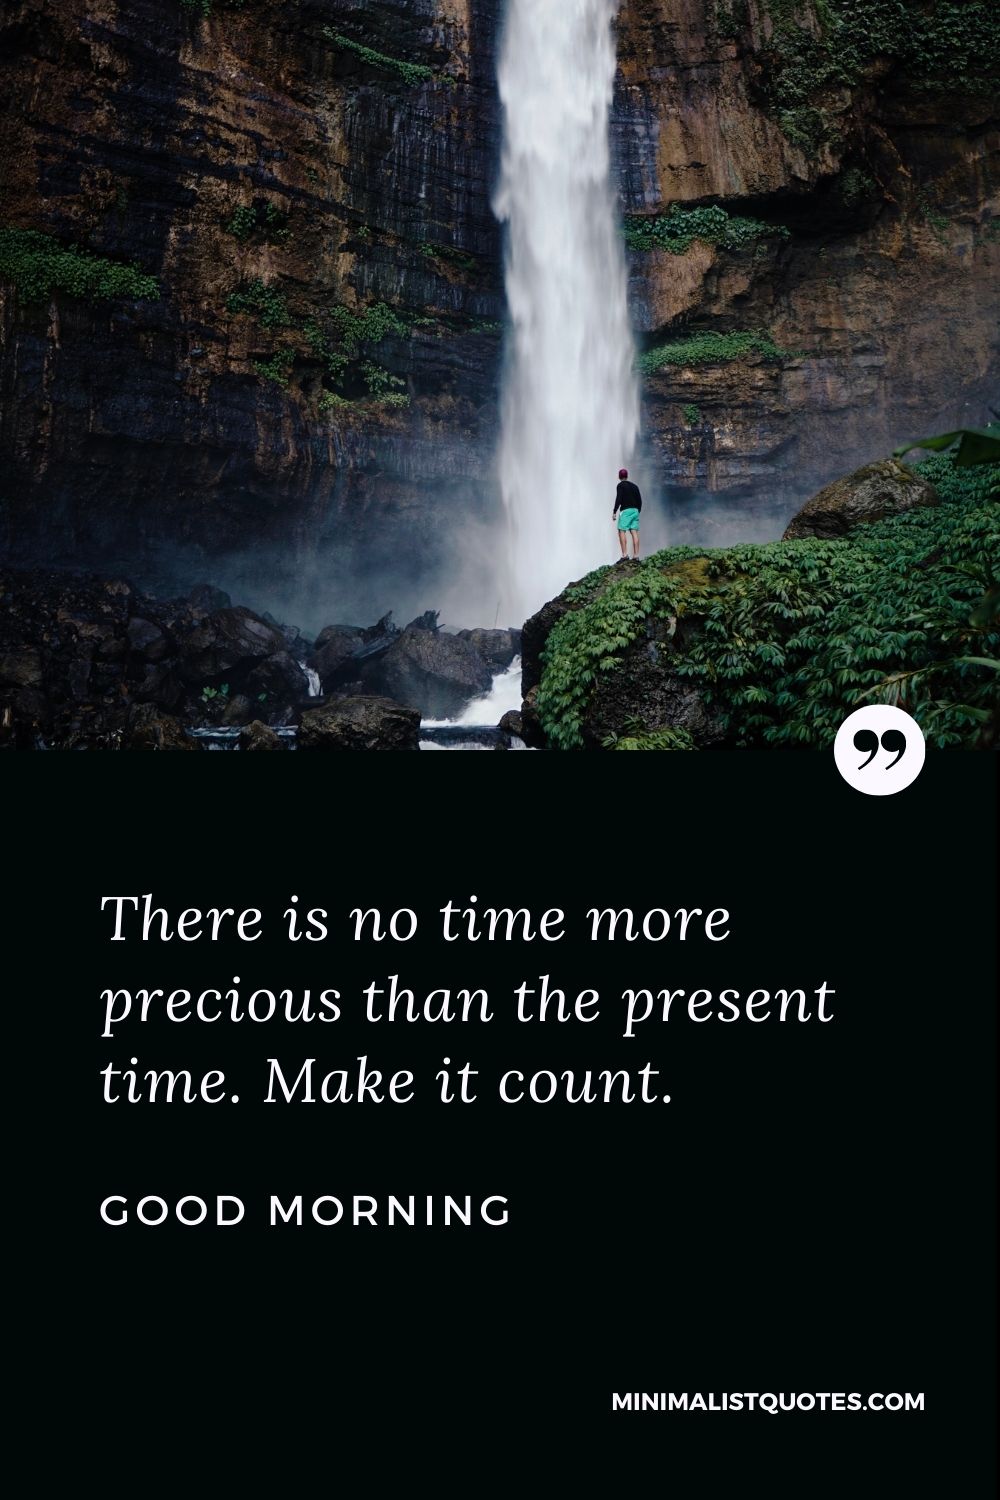 Good Morning Wish & Message With Image: There is no time more precious than the present time. Make it count.